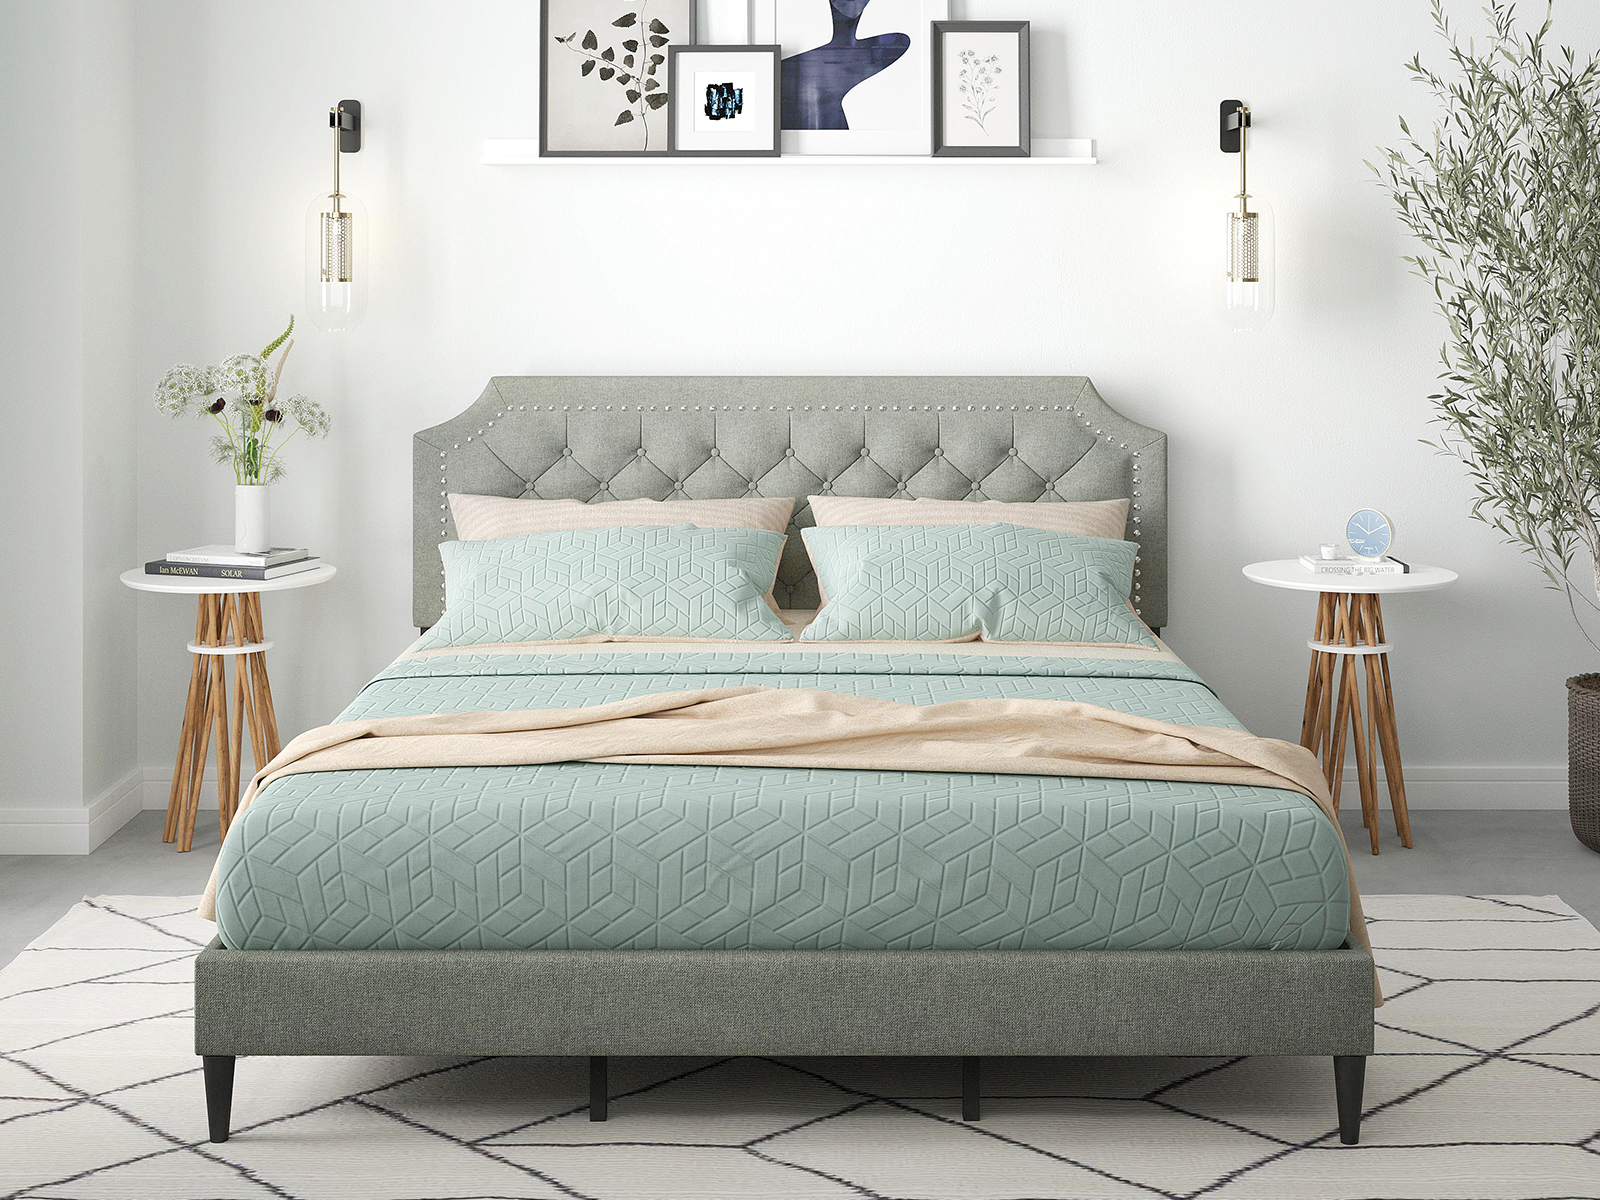 Glenwillow Home Upholstered Platform Bed Frame | Queen | Curta | Stone